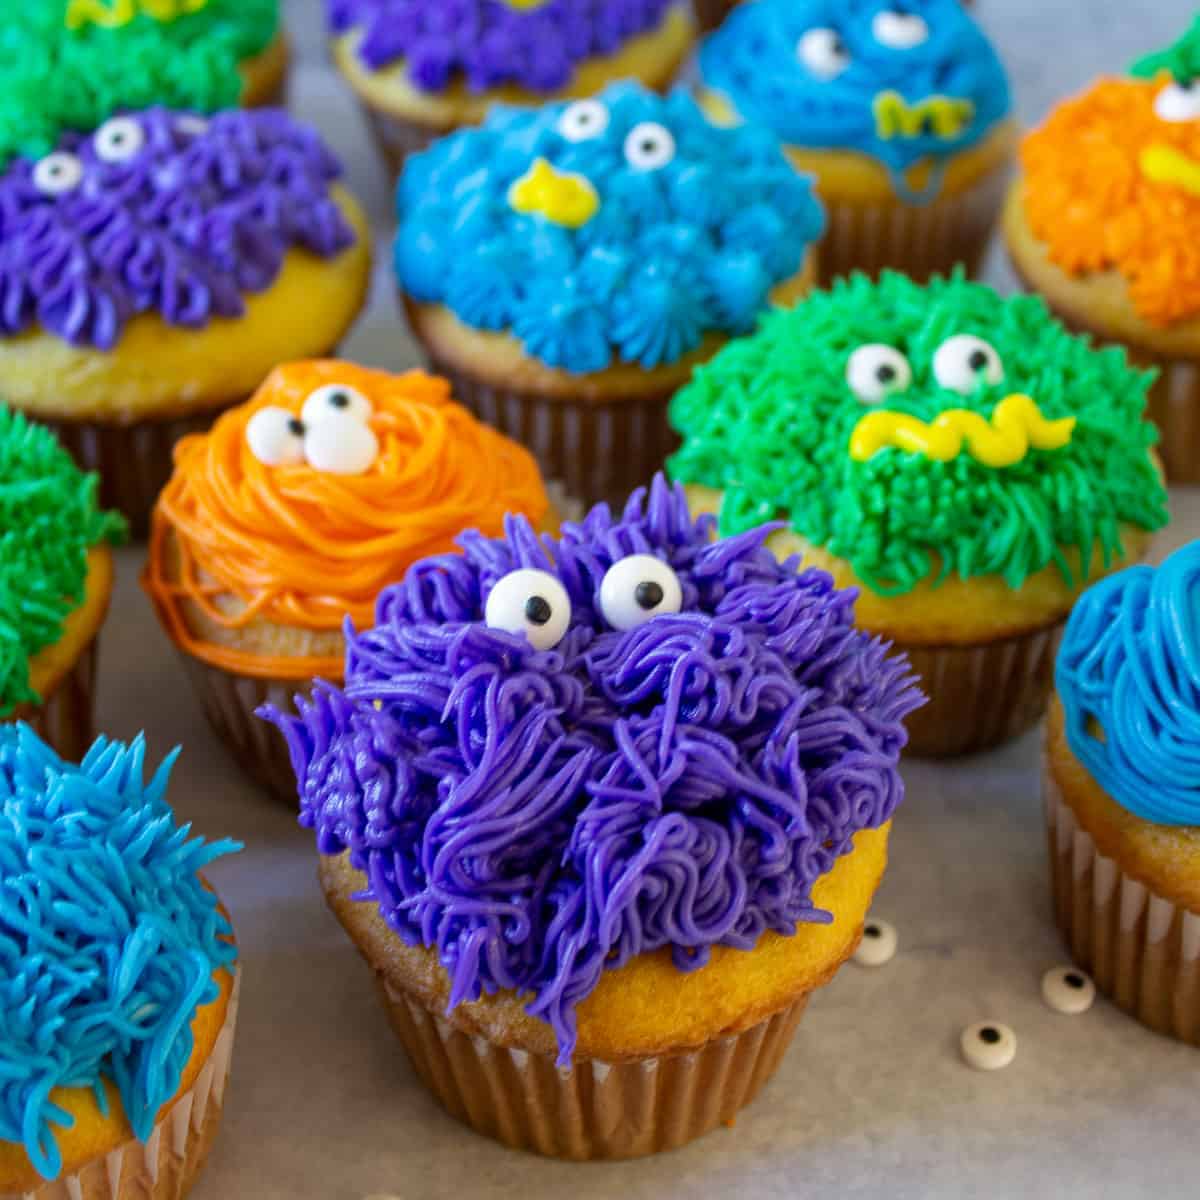 Colorful monster cupcakes with candy eyes arranged in a group.